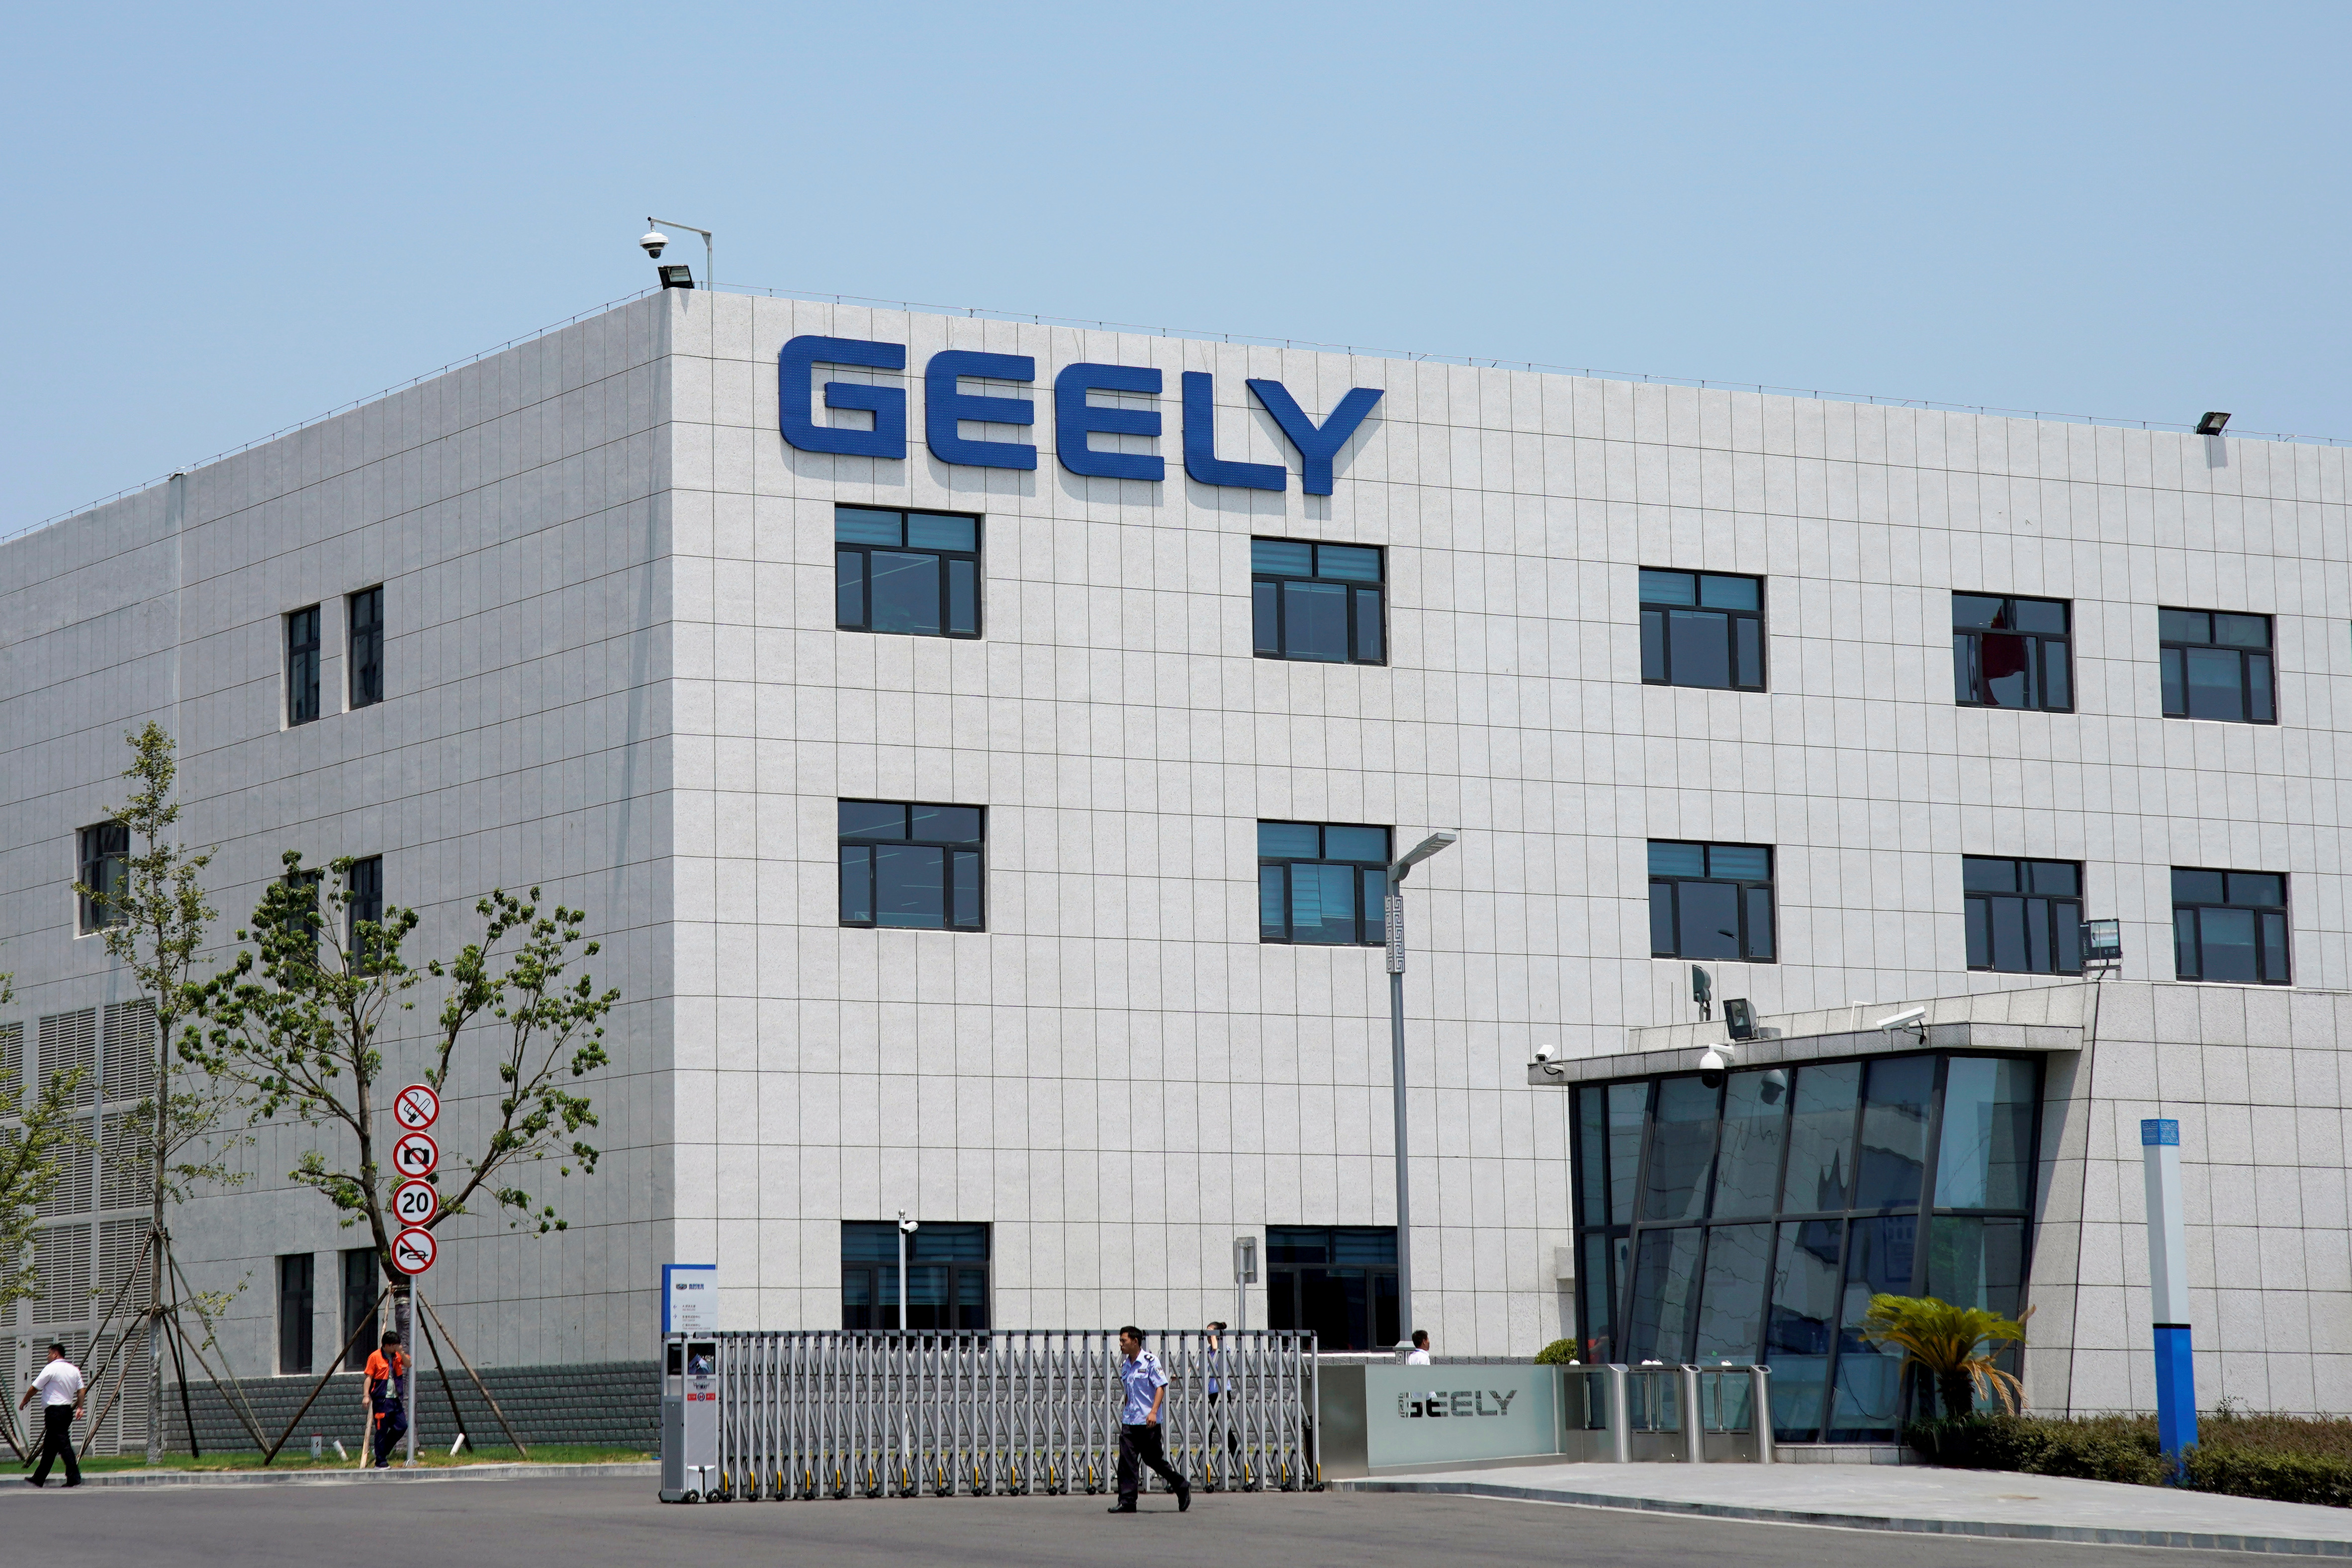 A building of the Geely Auto Research Institute is seen in Ningbo, Zhejiang province, China August 4, 2017. REUTERS/Aly Song/File Photo